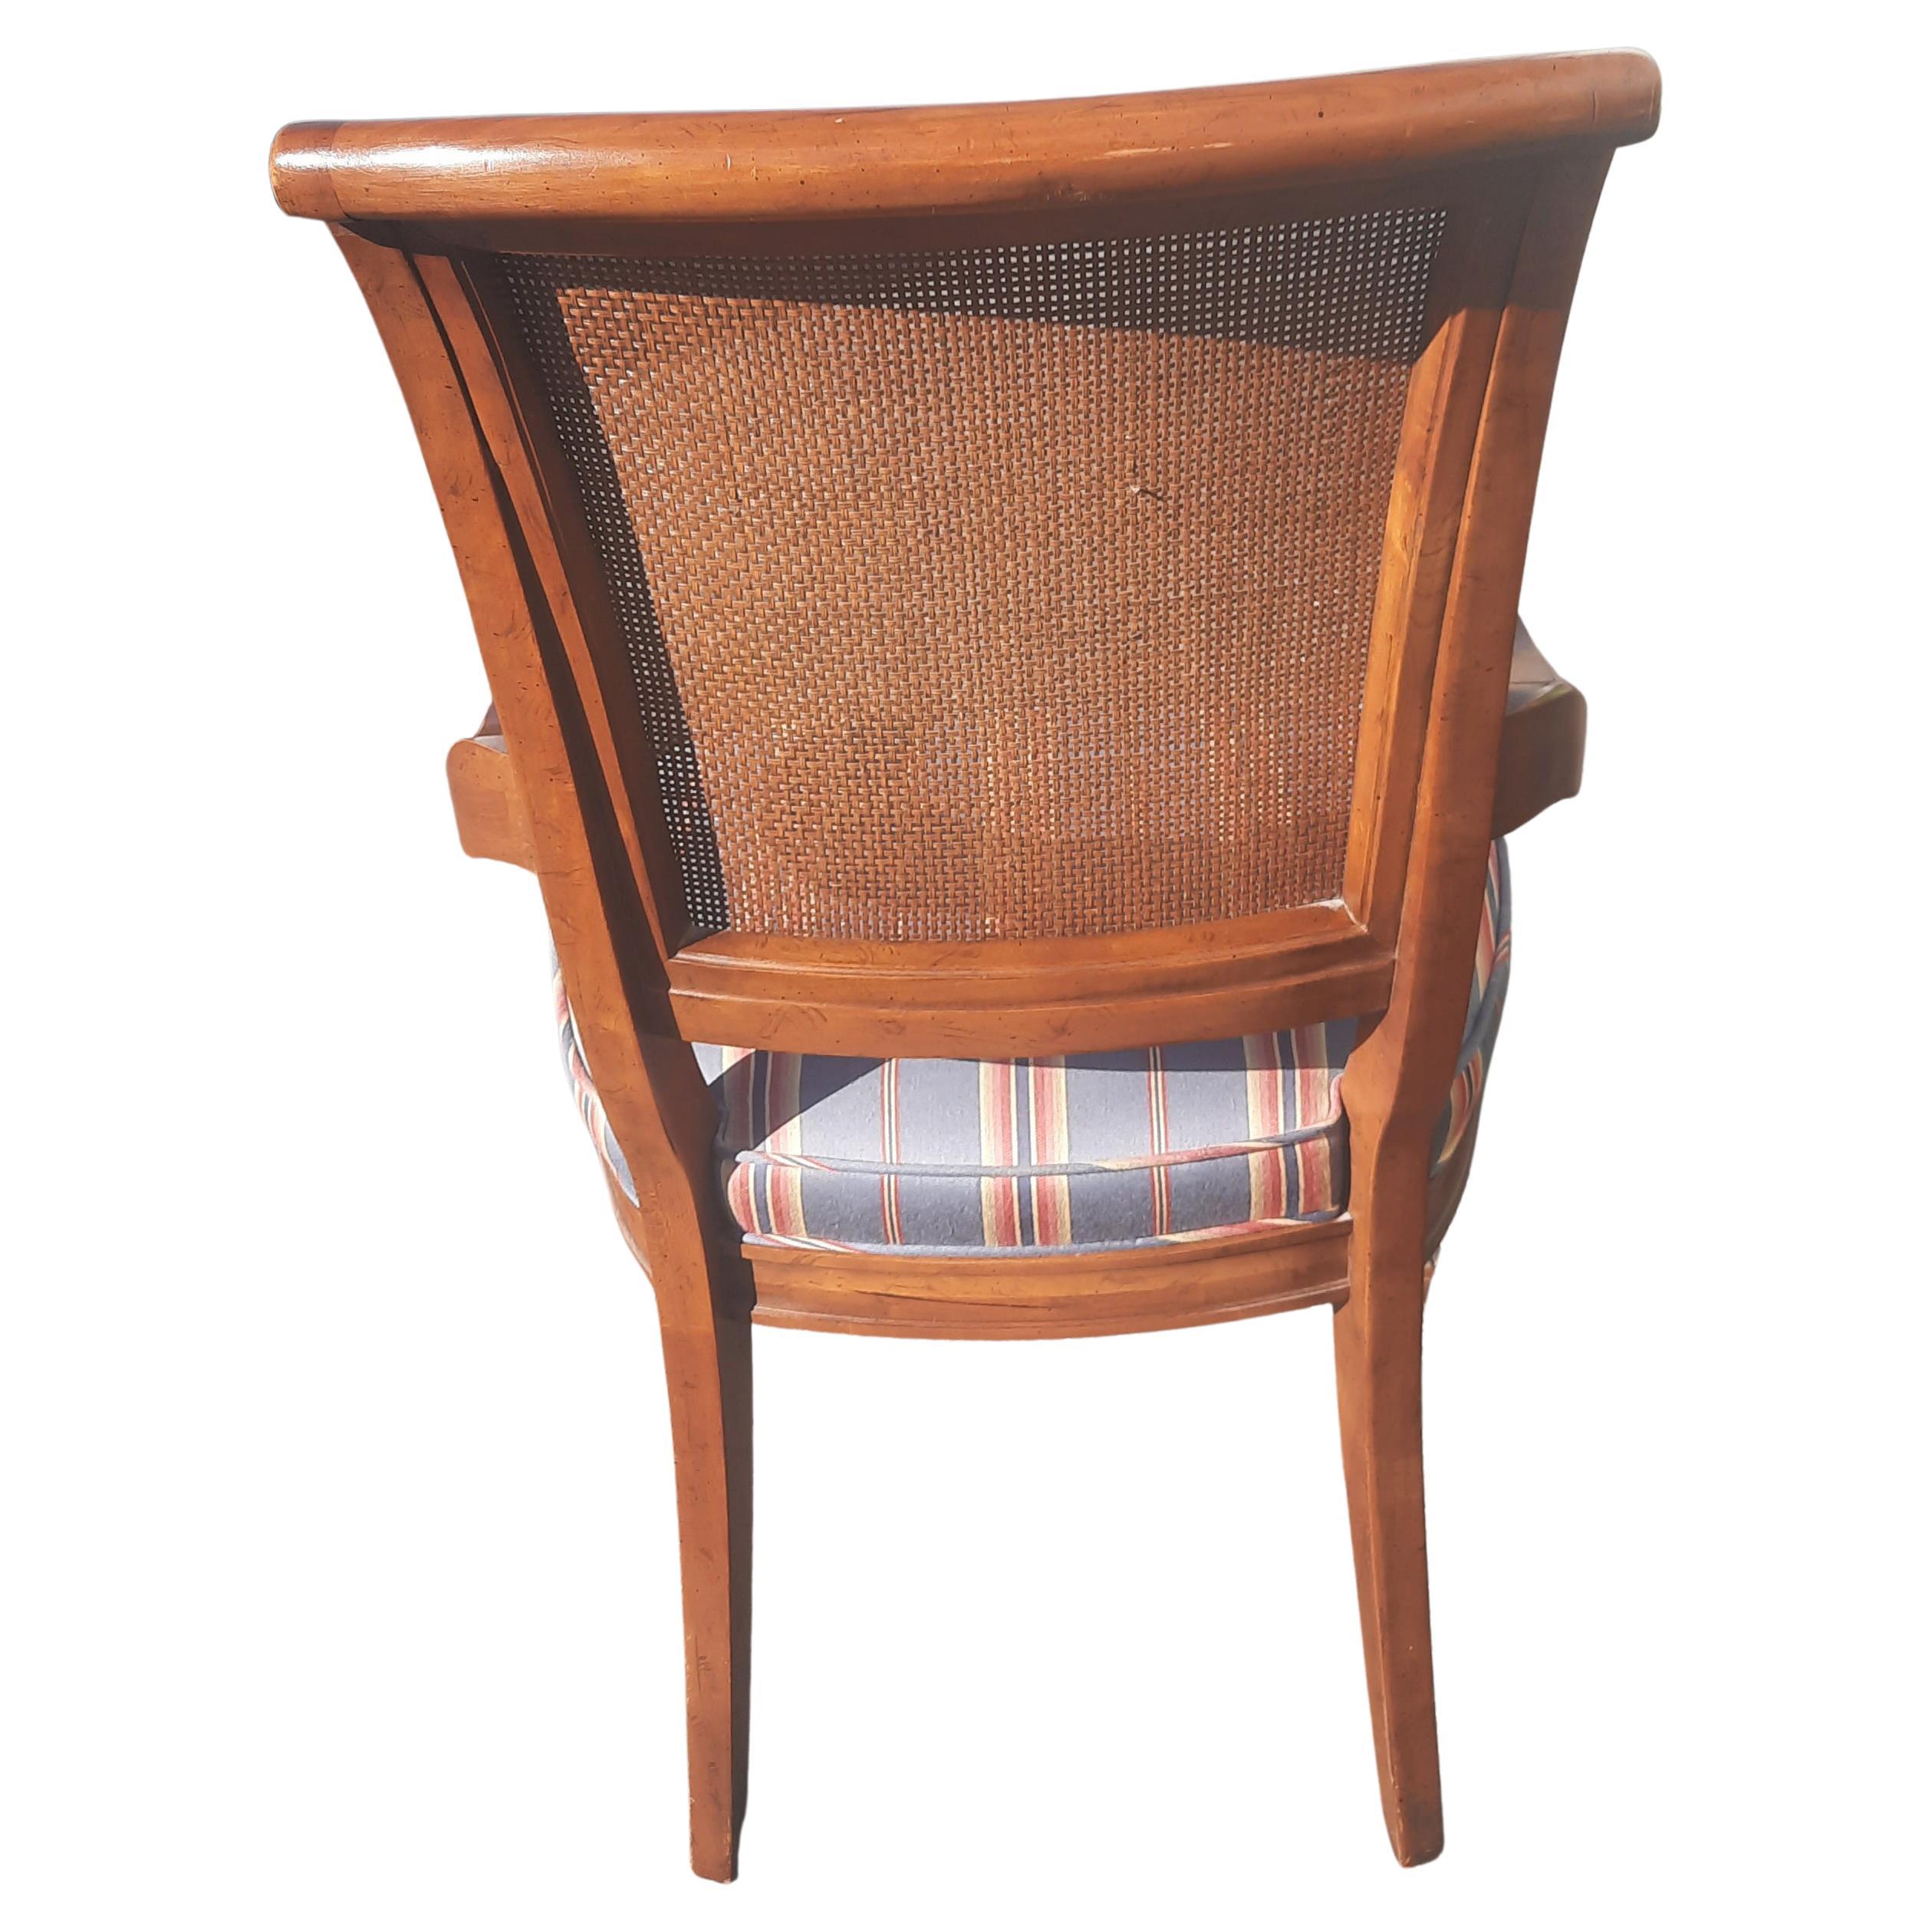 American Henredon Mid-Century French Country Cane Back Upholstered Chairs, a Pair For Sale